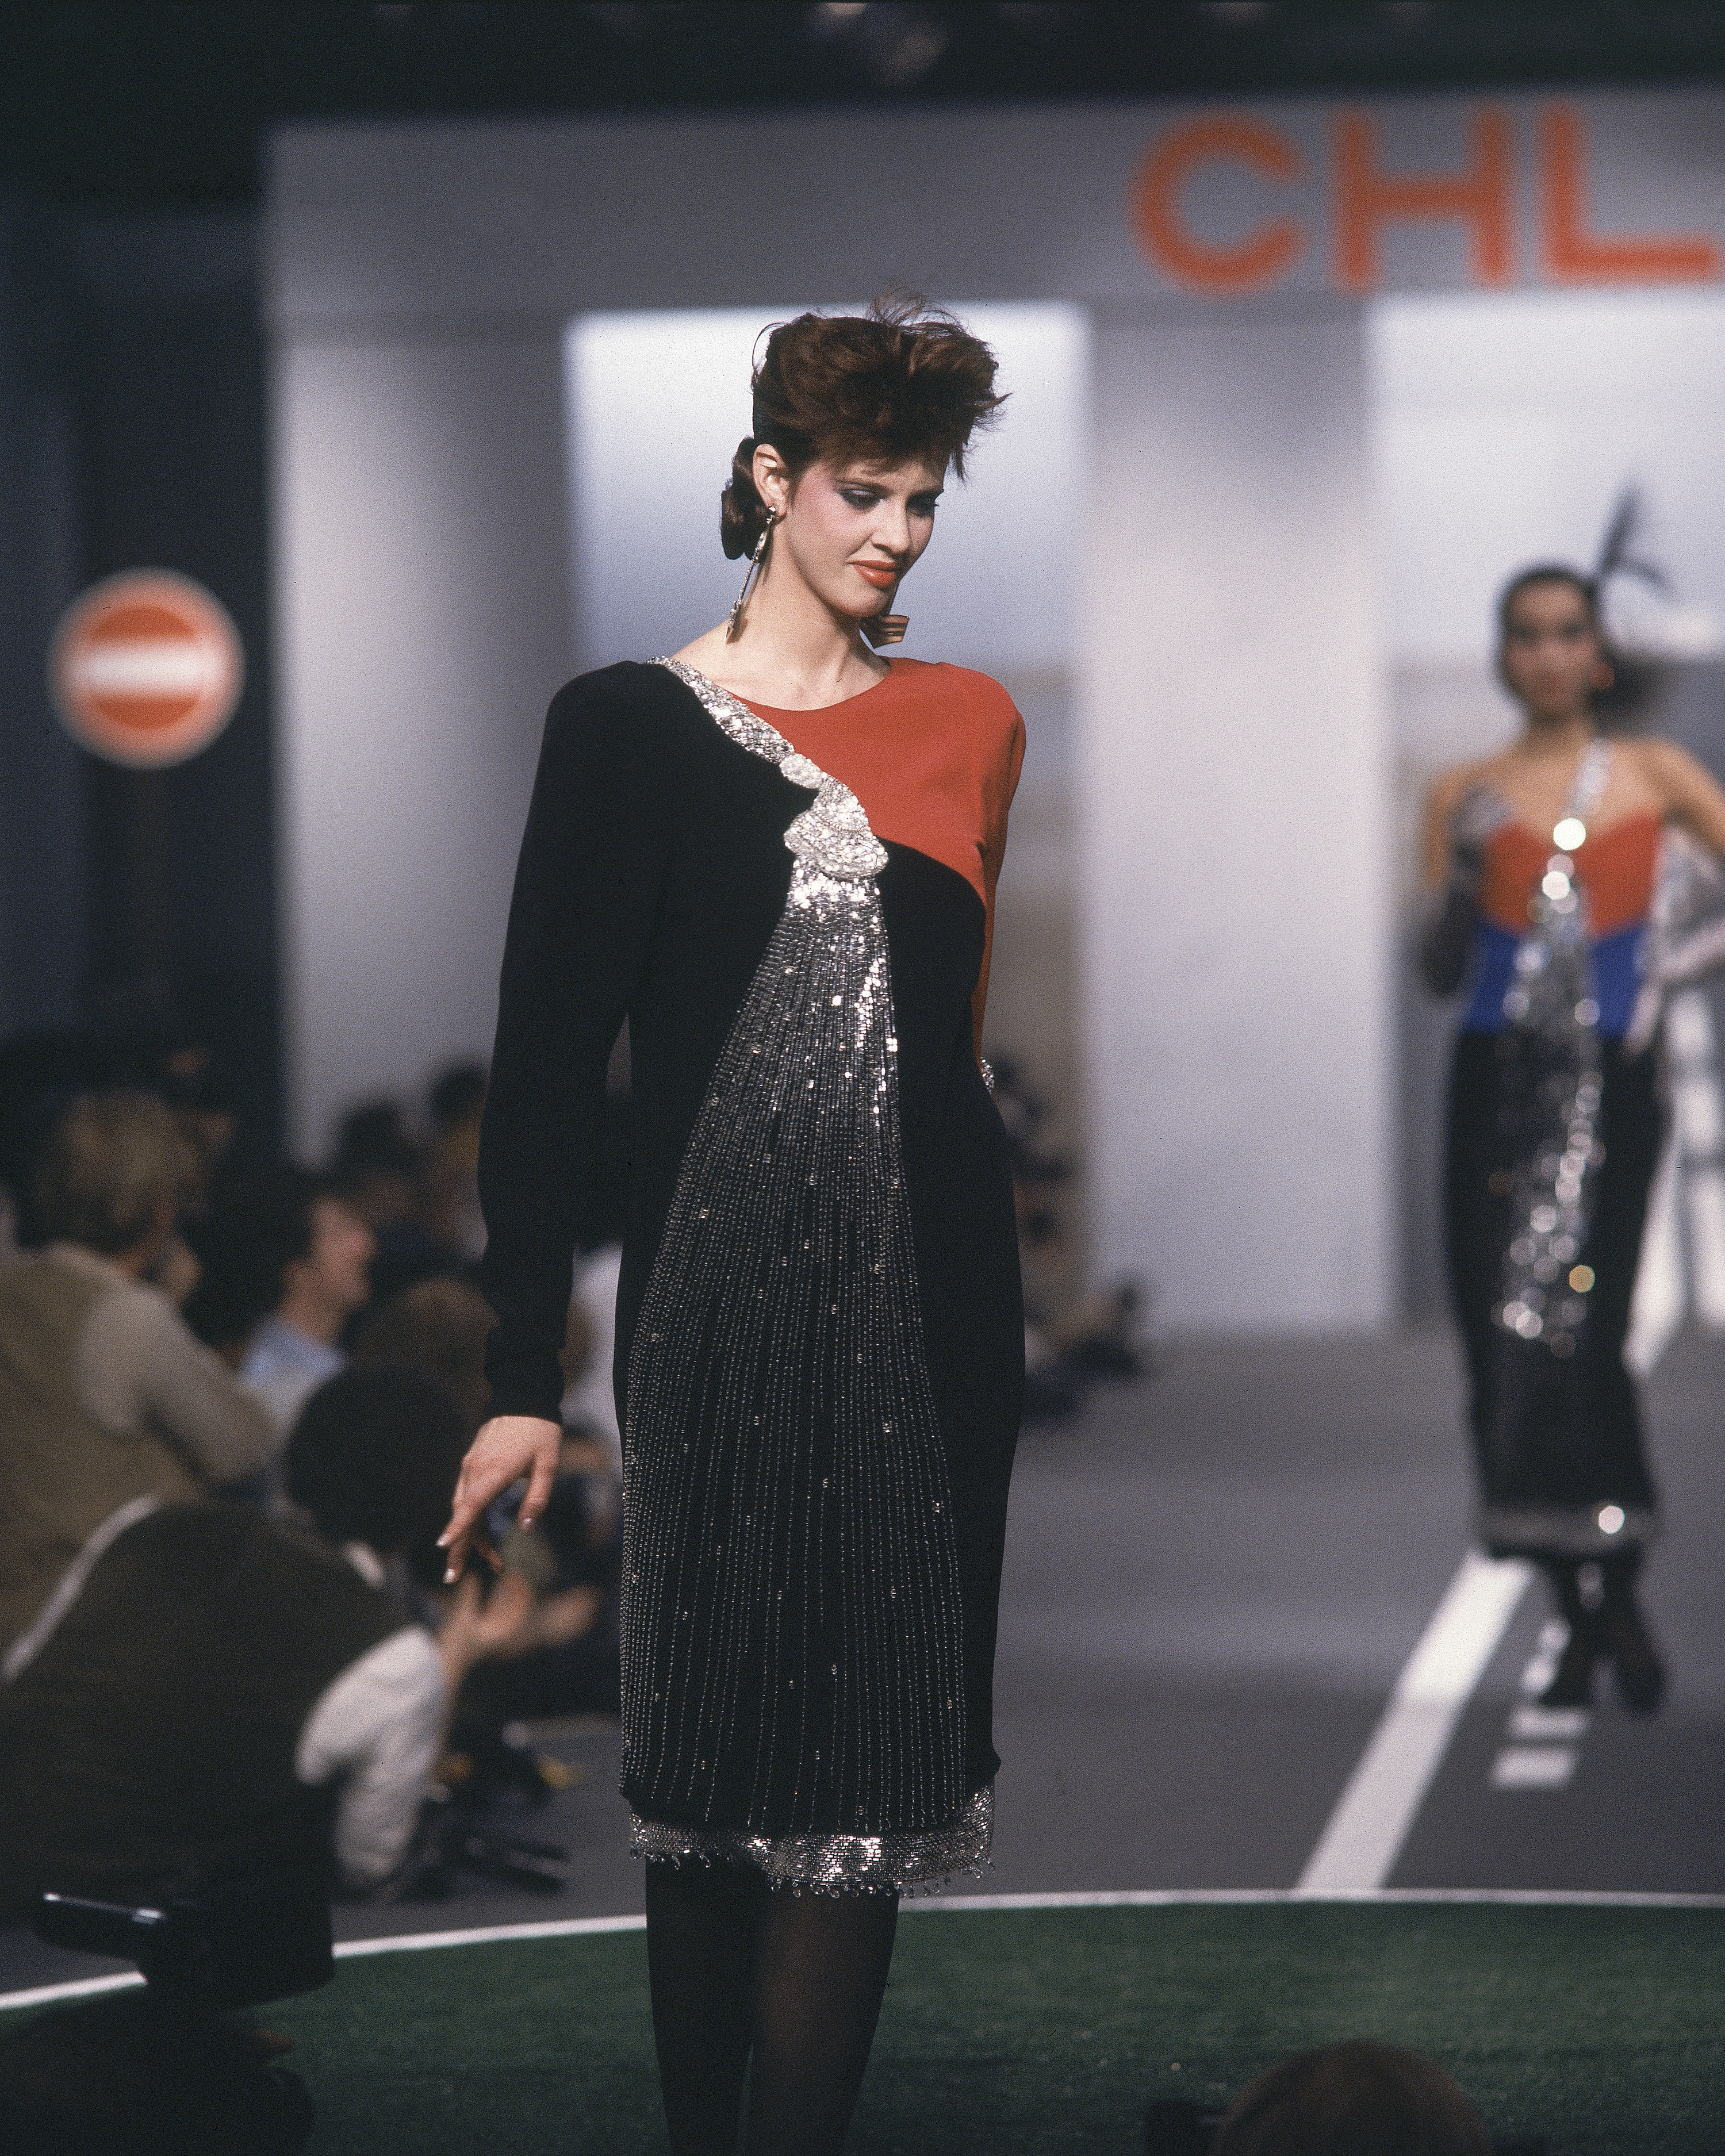 Model on the runway of Karl Lagerfeld&#x27;s Fall 1983 Ready-To-Wear collection for Chloe on March 21, 1983 in Paris, France